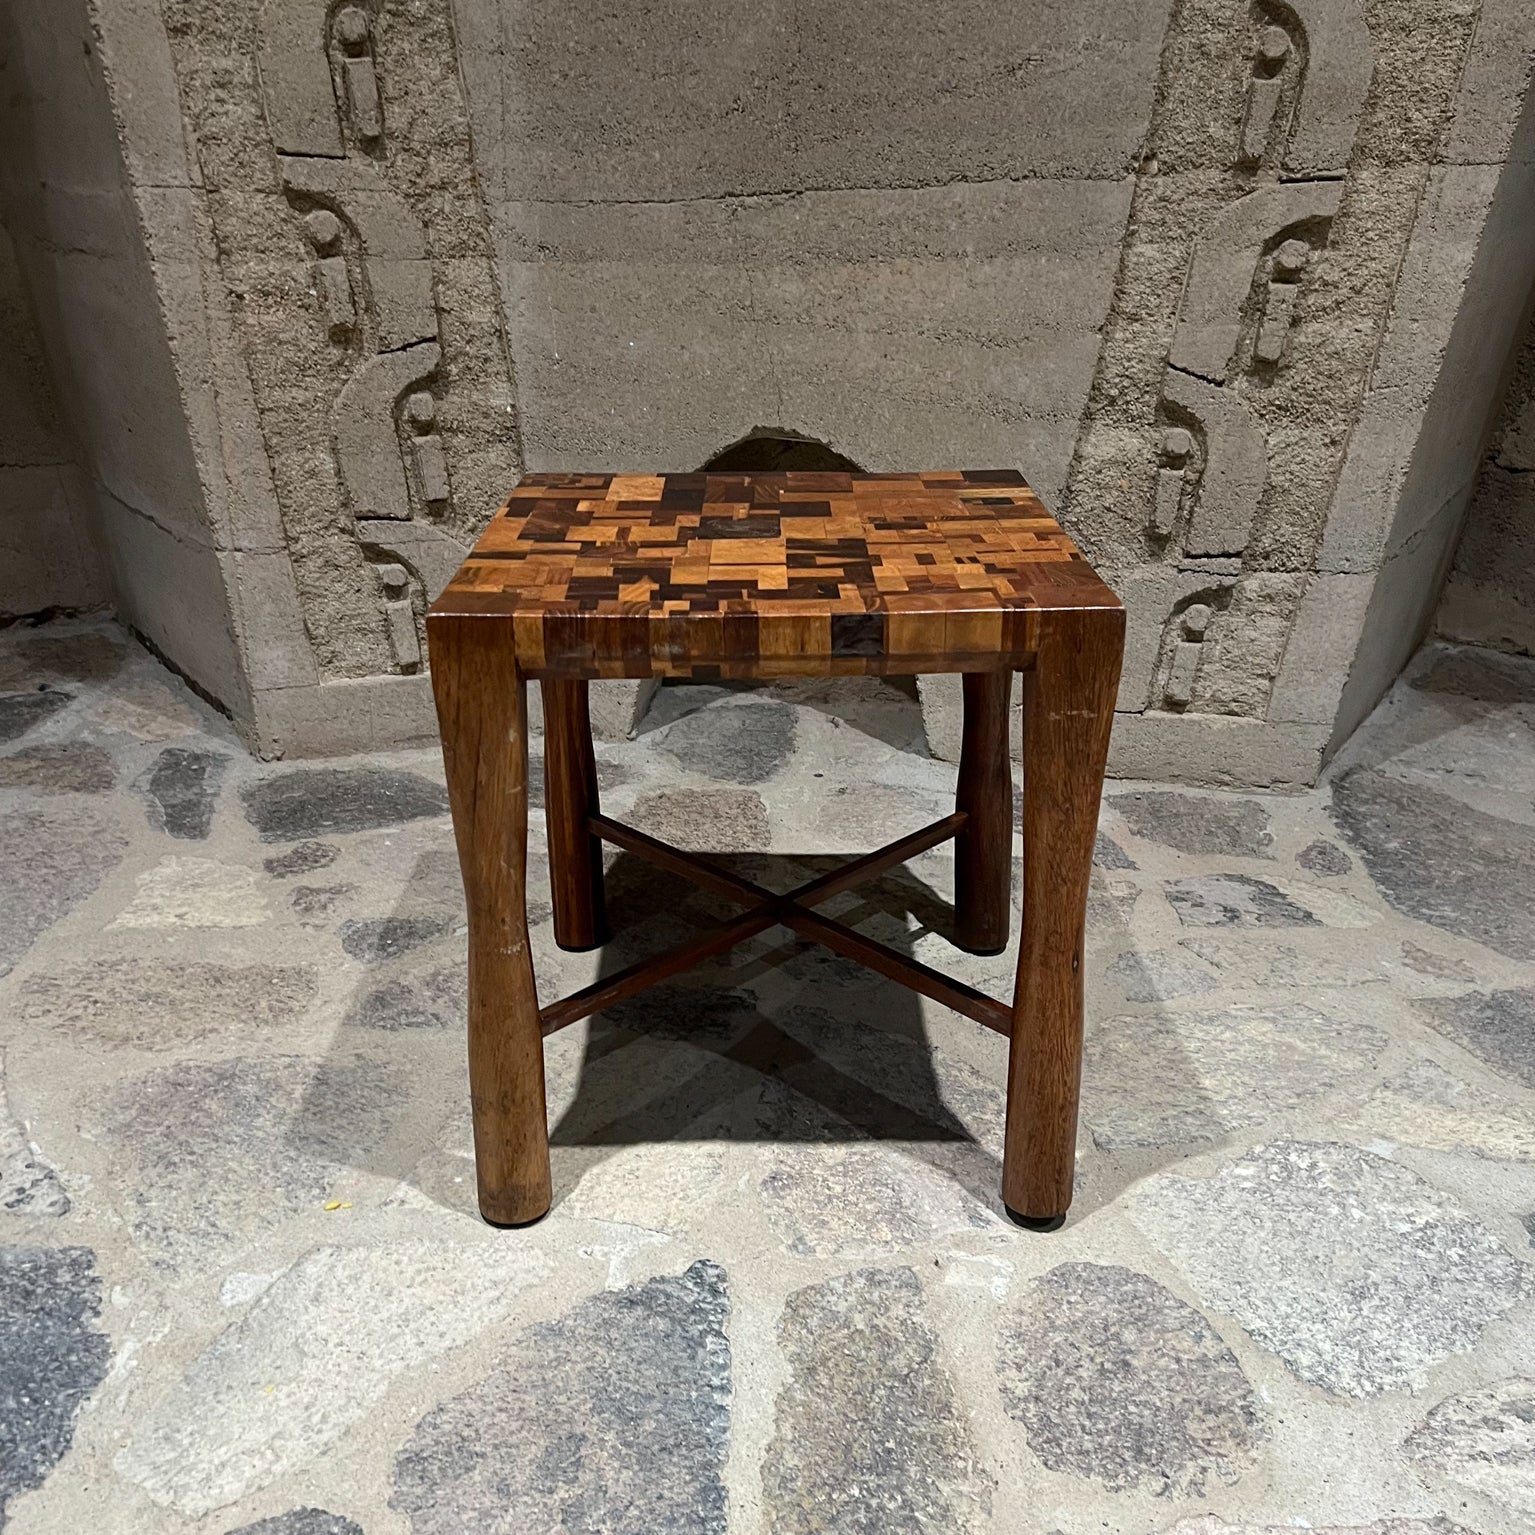 1970s Custom-made Exotic Wood Side Table Style of Don Shoemaker Mexico
Single hand-crafted side table in exotic wood
17.25 x 16.5 d x 16.25
Original preowned vintage condition
See images provided.
Delivery to LA and OC.





